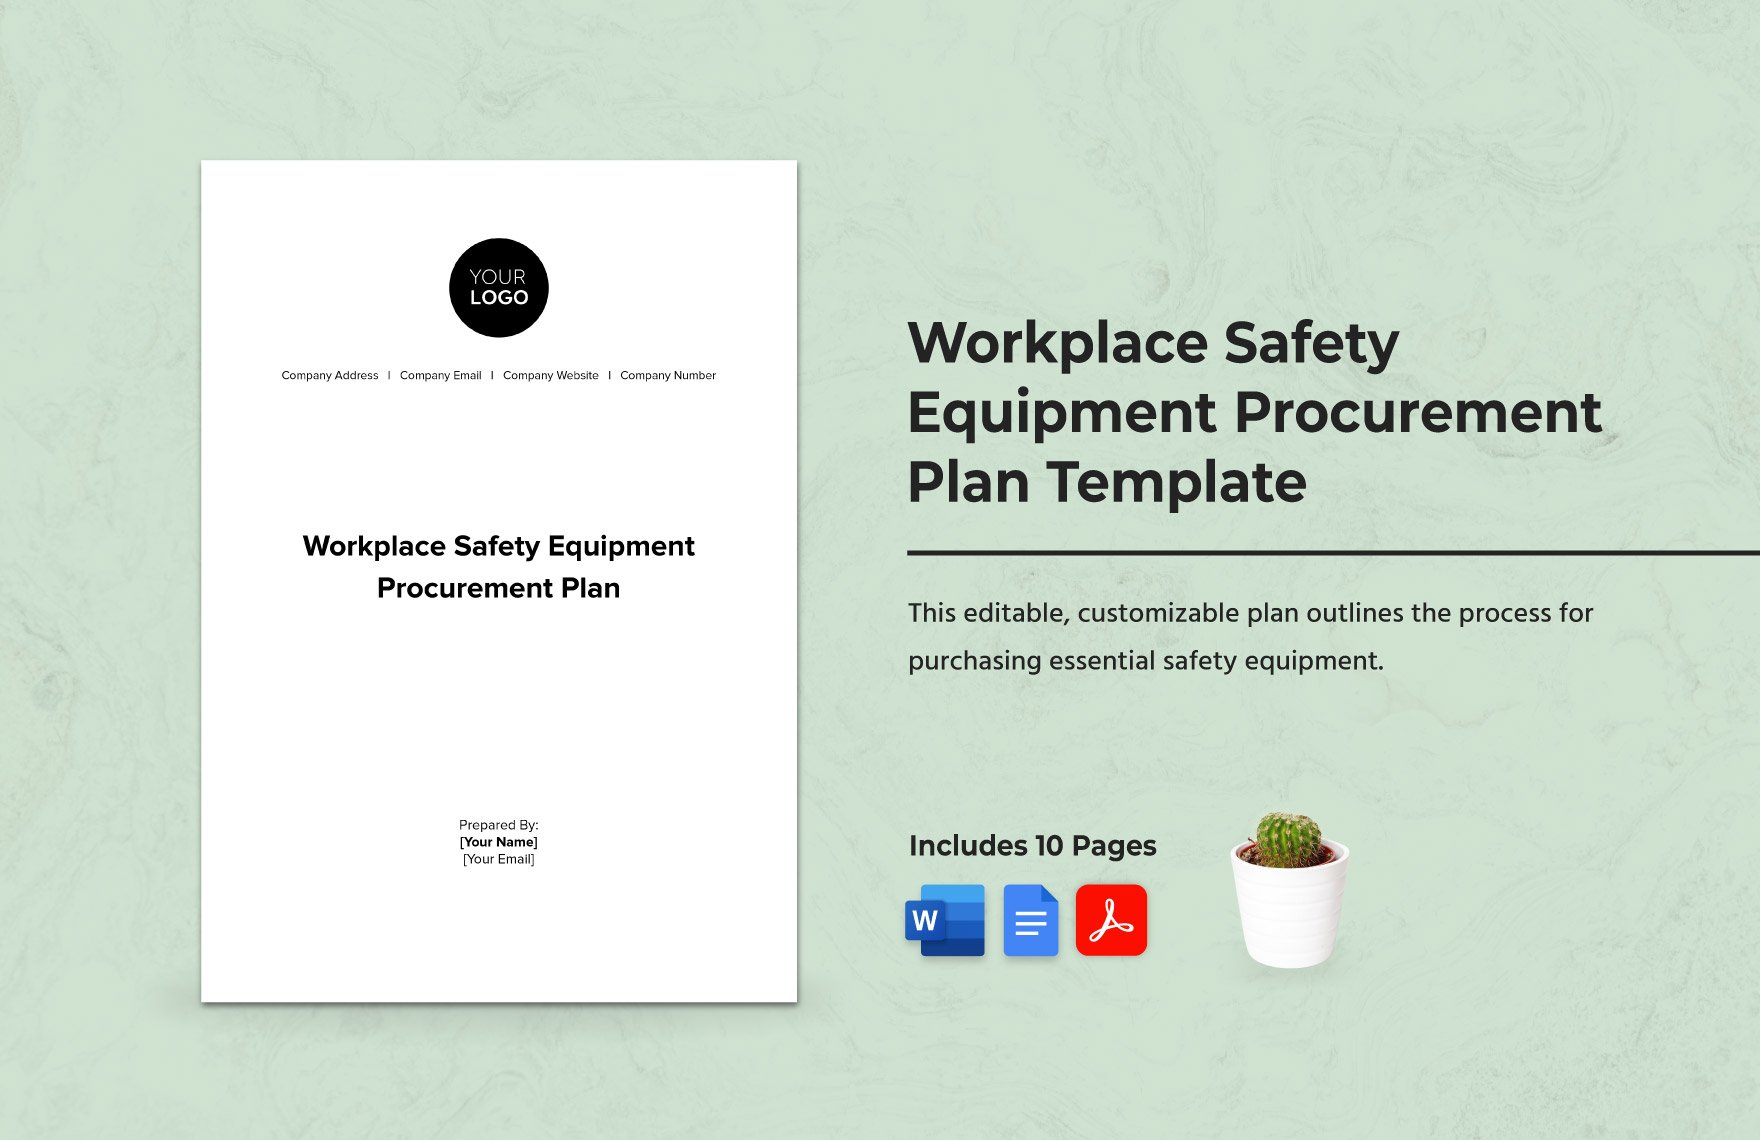 Workplace Safety Equipment Procurement Plan Template in Word, Google Docs, PDF